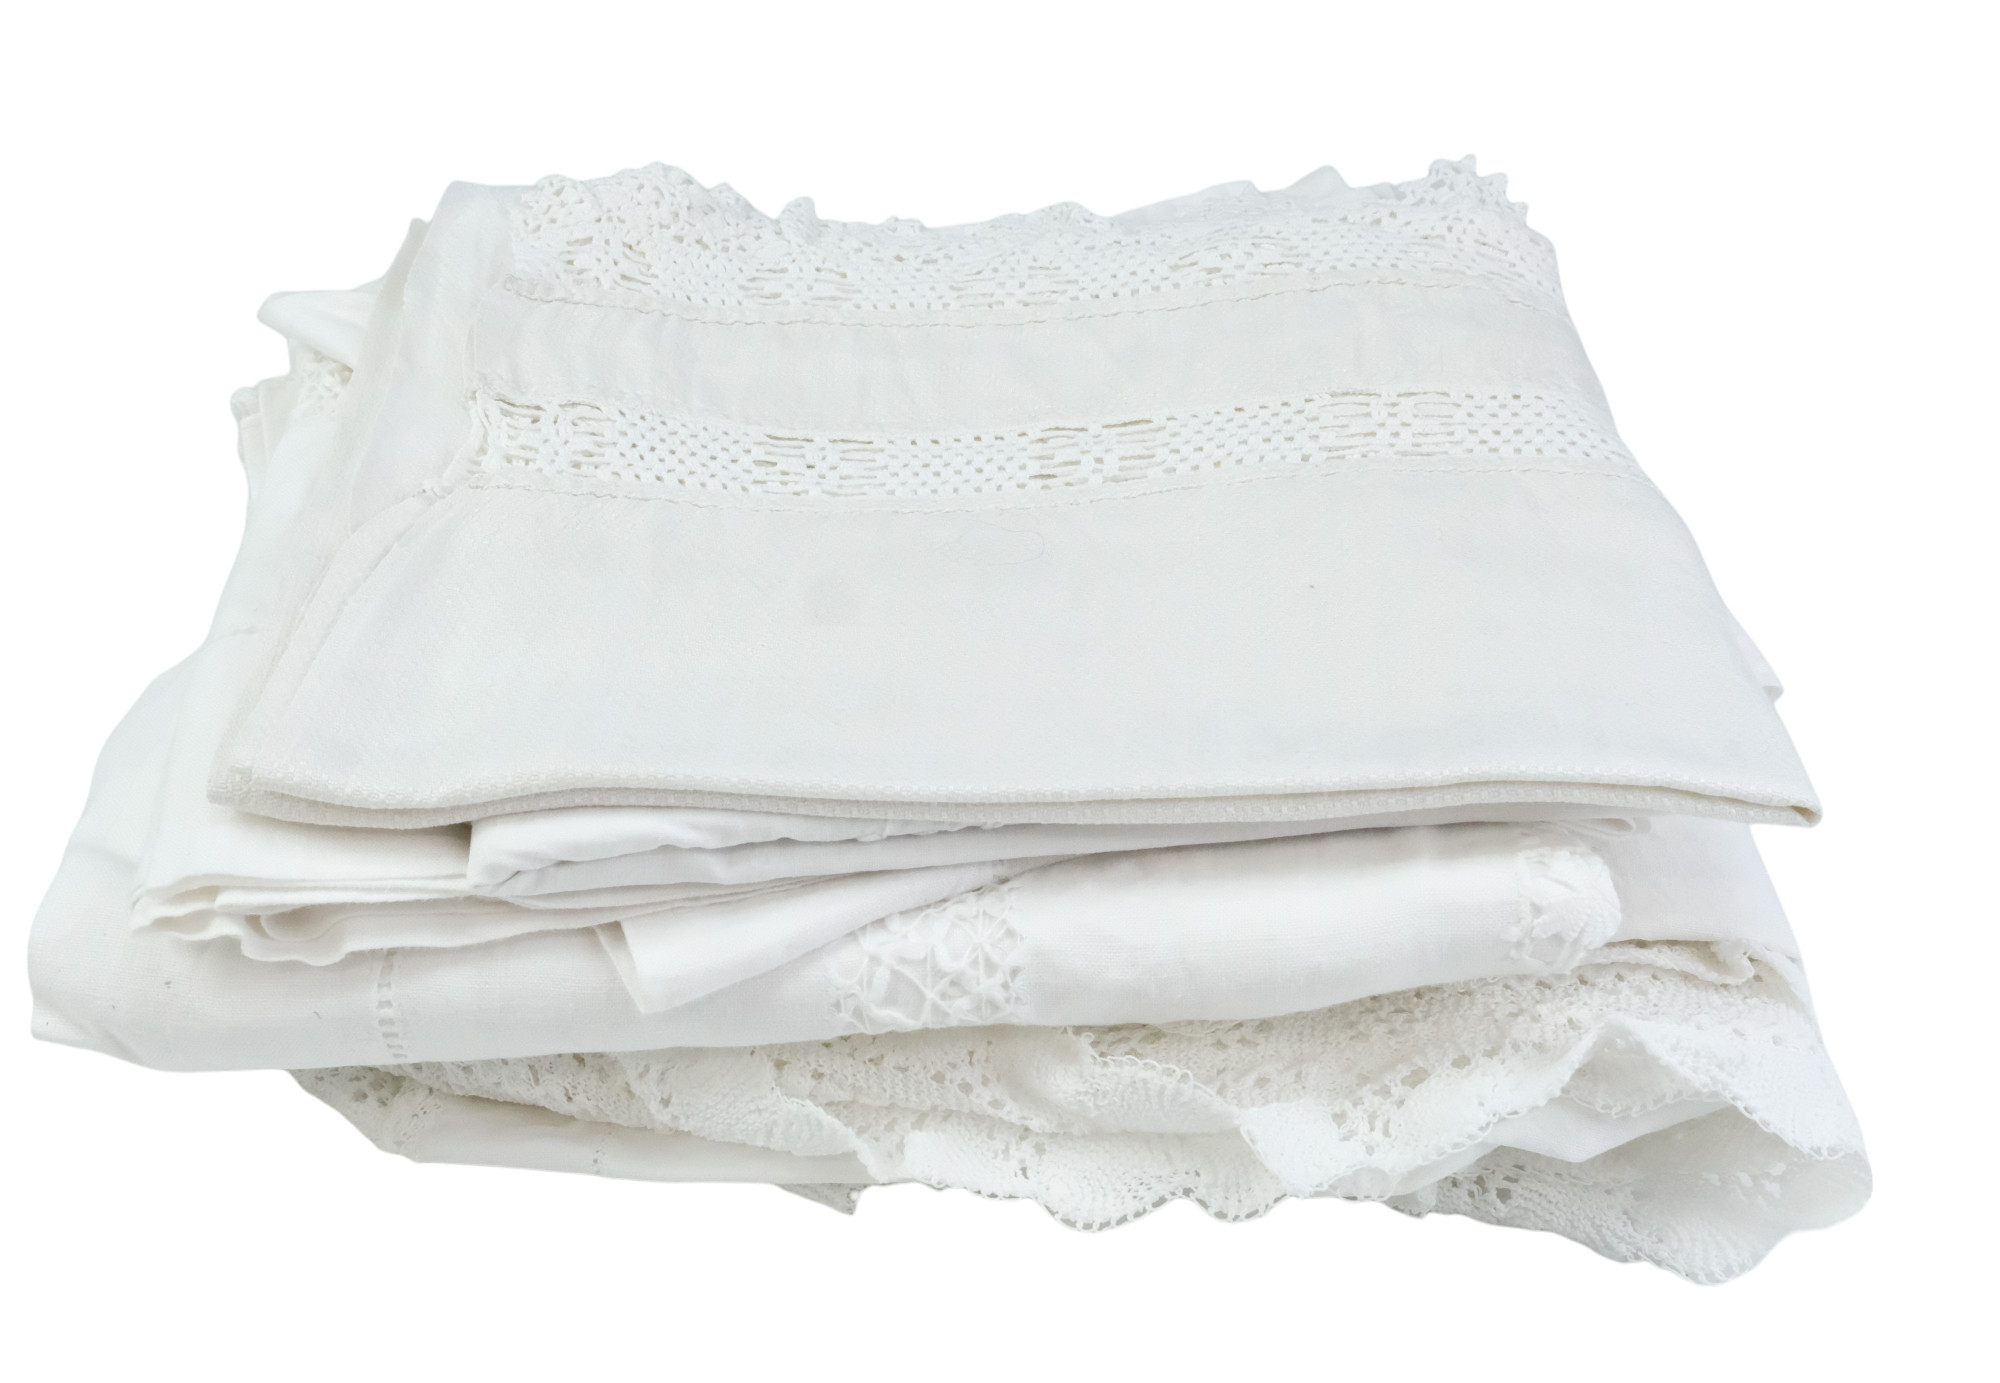 A quantity of hand-embroidered linen and other finely crocheted tablecloths, borders / edging, - Image 4 of 5